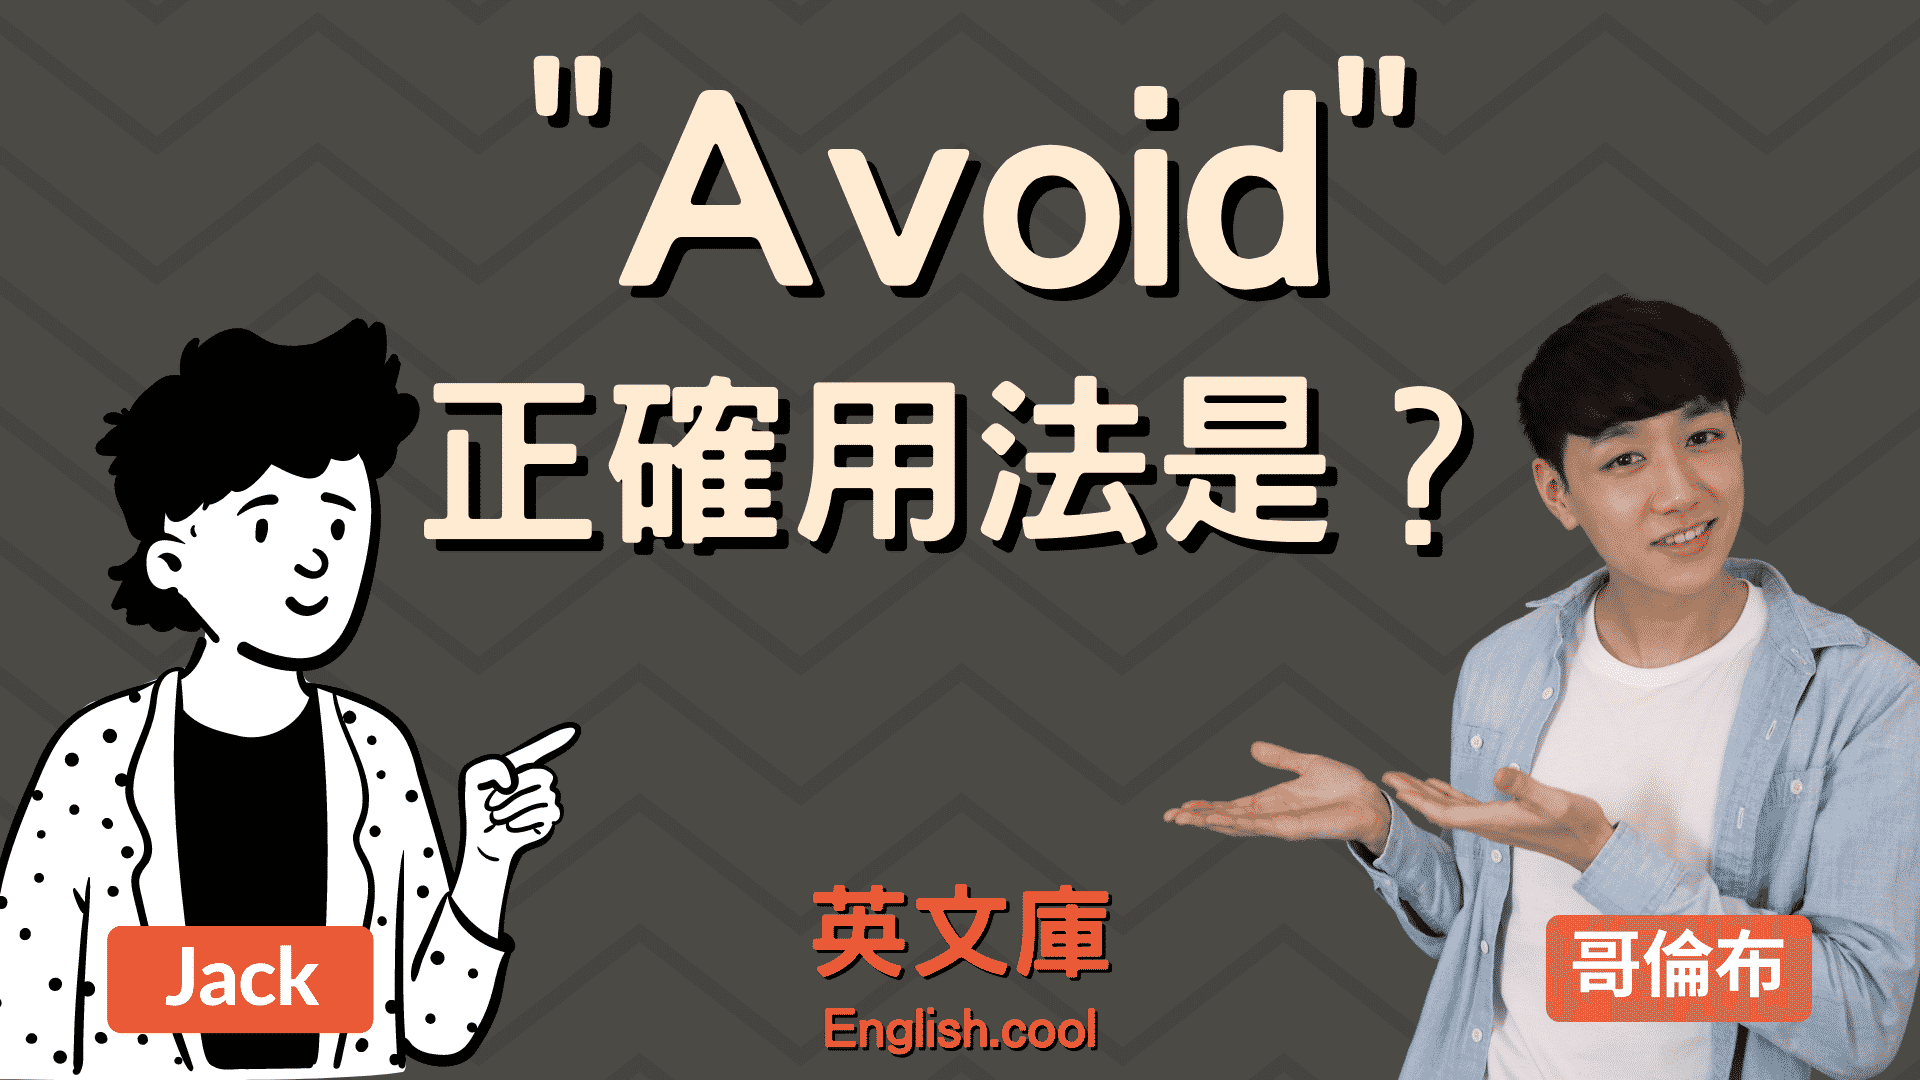 You are currently viewing 「avoid」正確用法是？跟 prevent 用法差在哪？